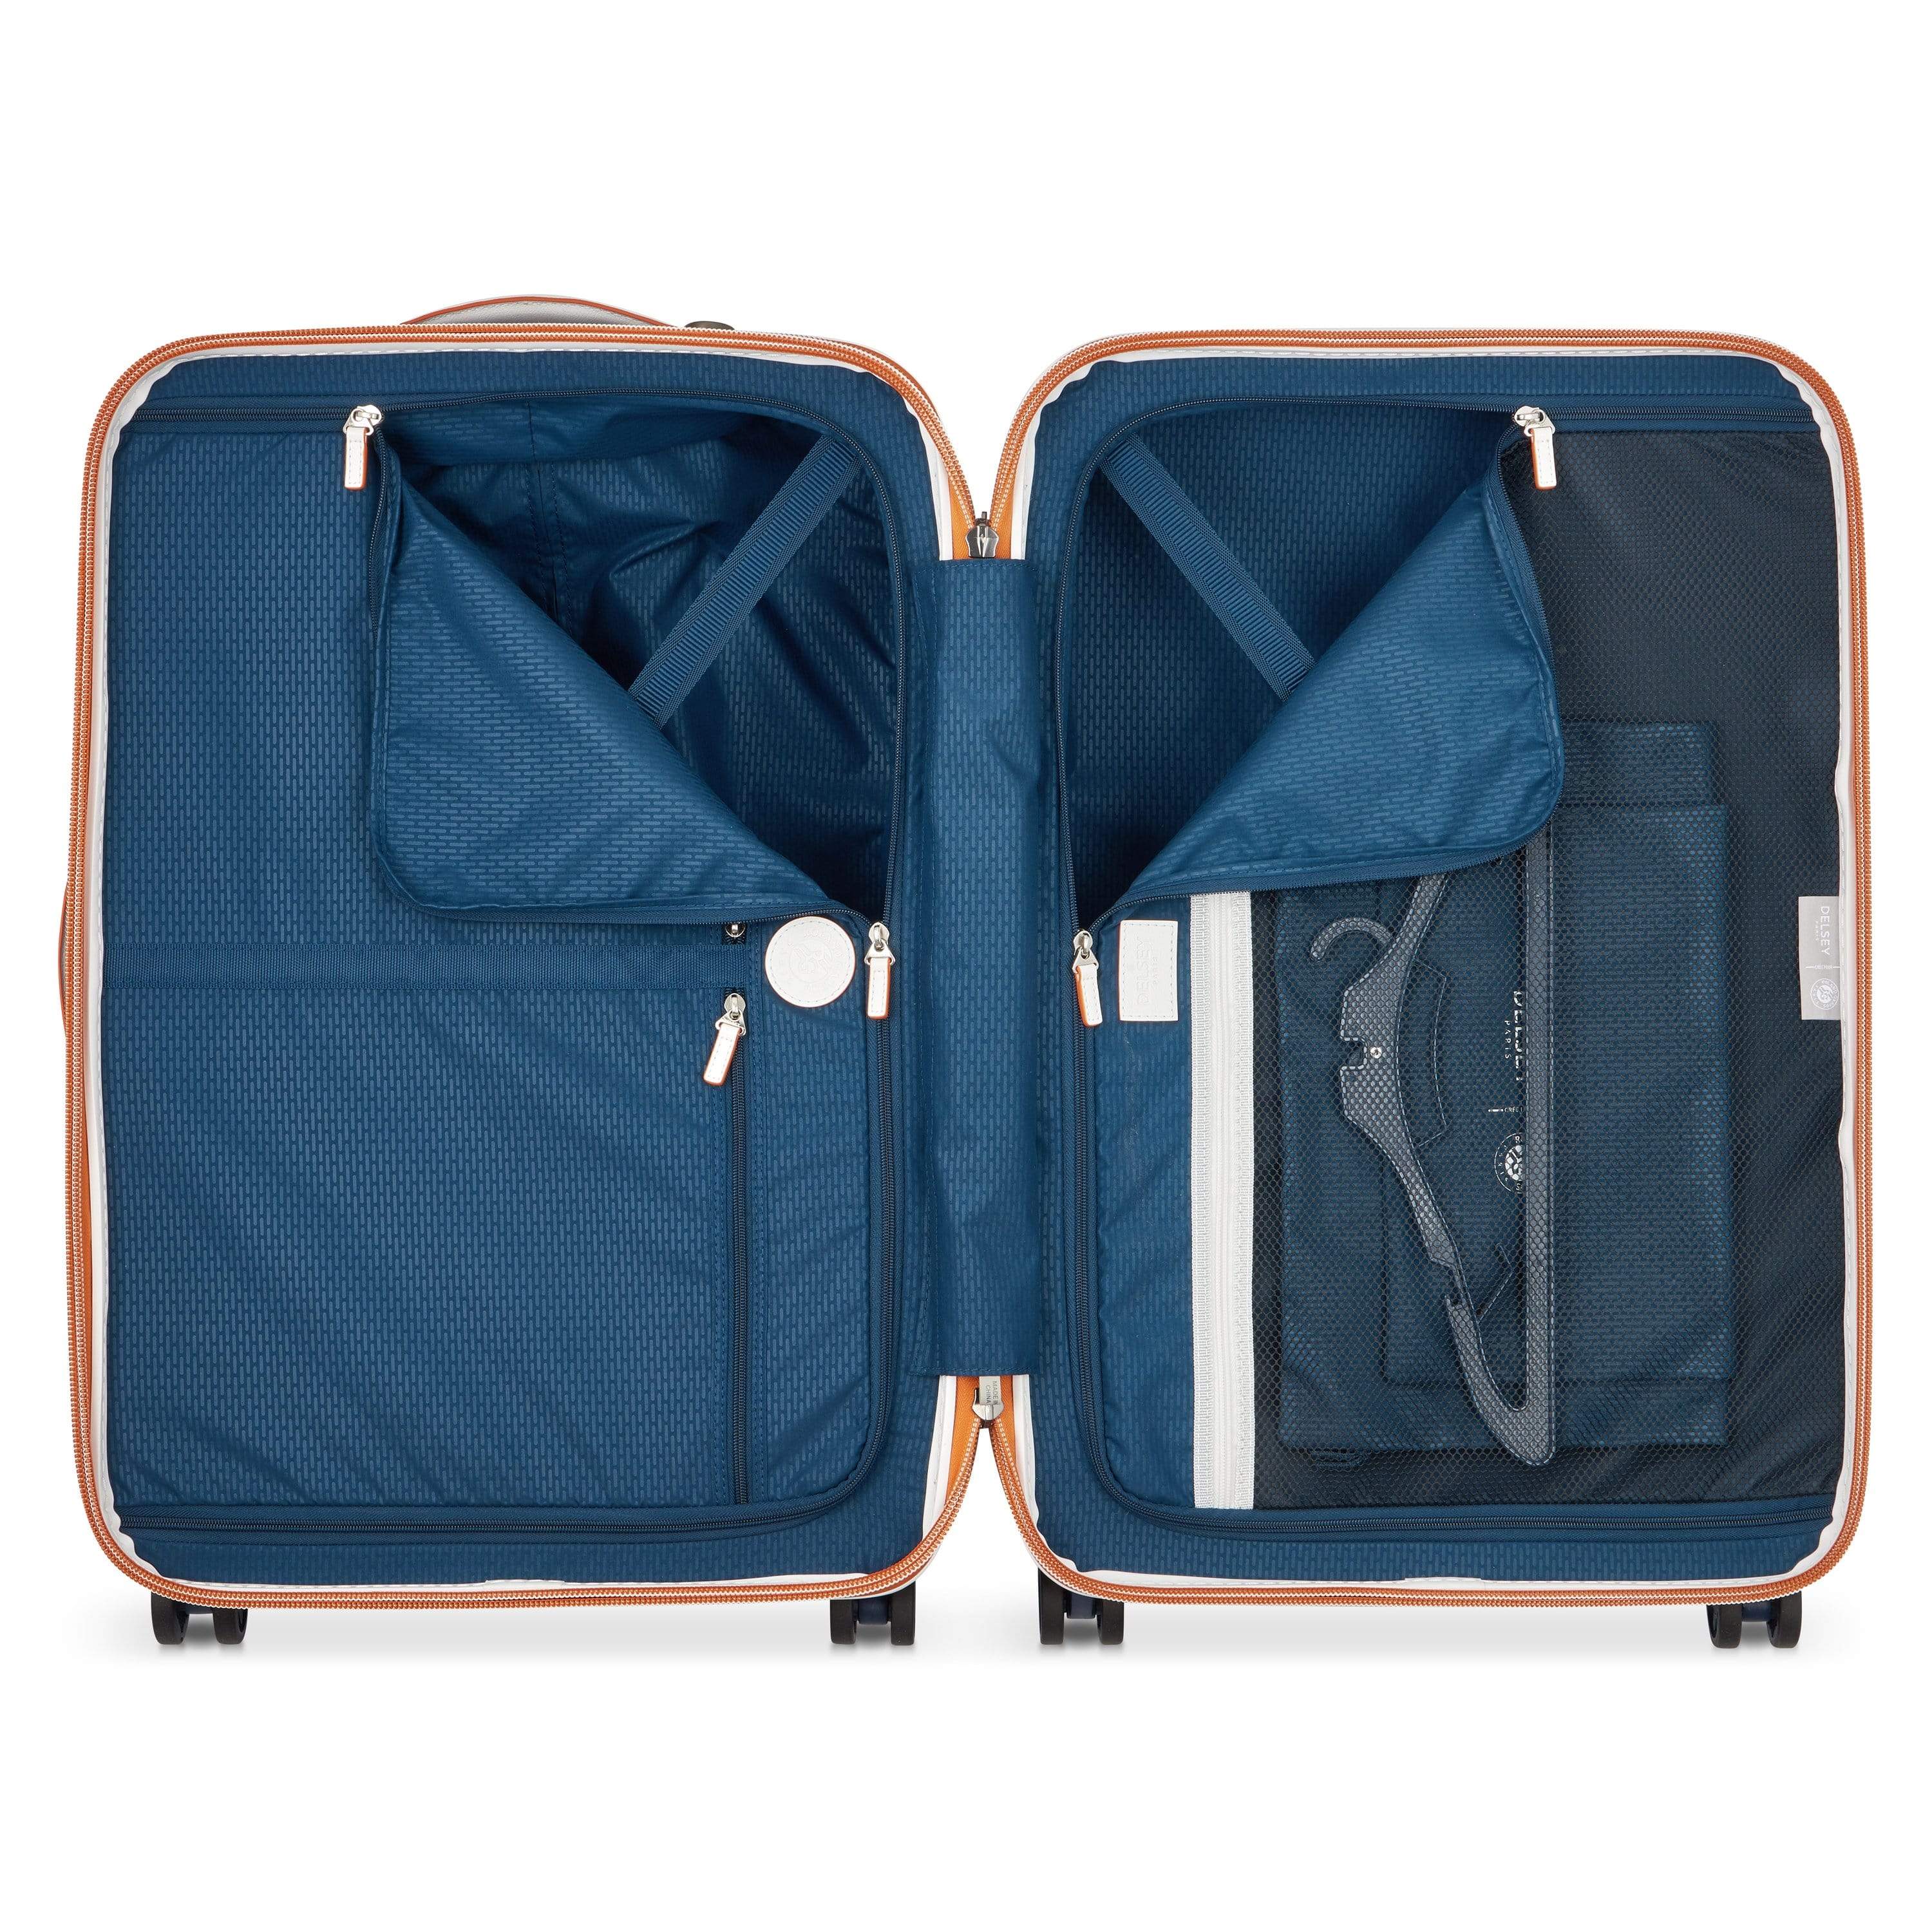 Delsey Chatelet Air 67cm Hardcase 4 Double Wheel Check-In Luggage Trolley Navy - 00167281802